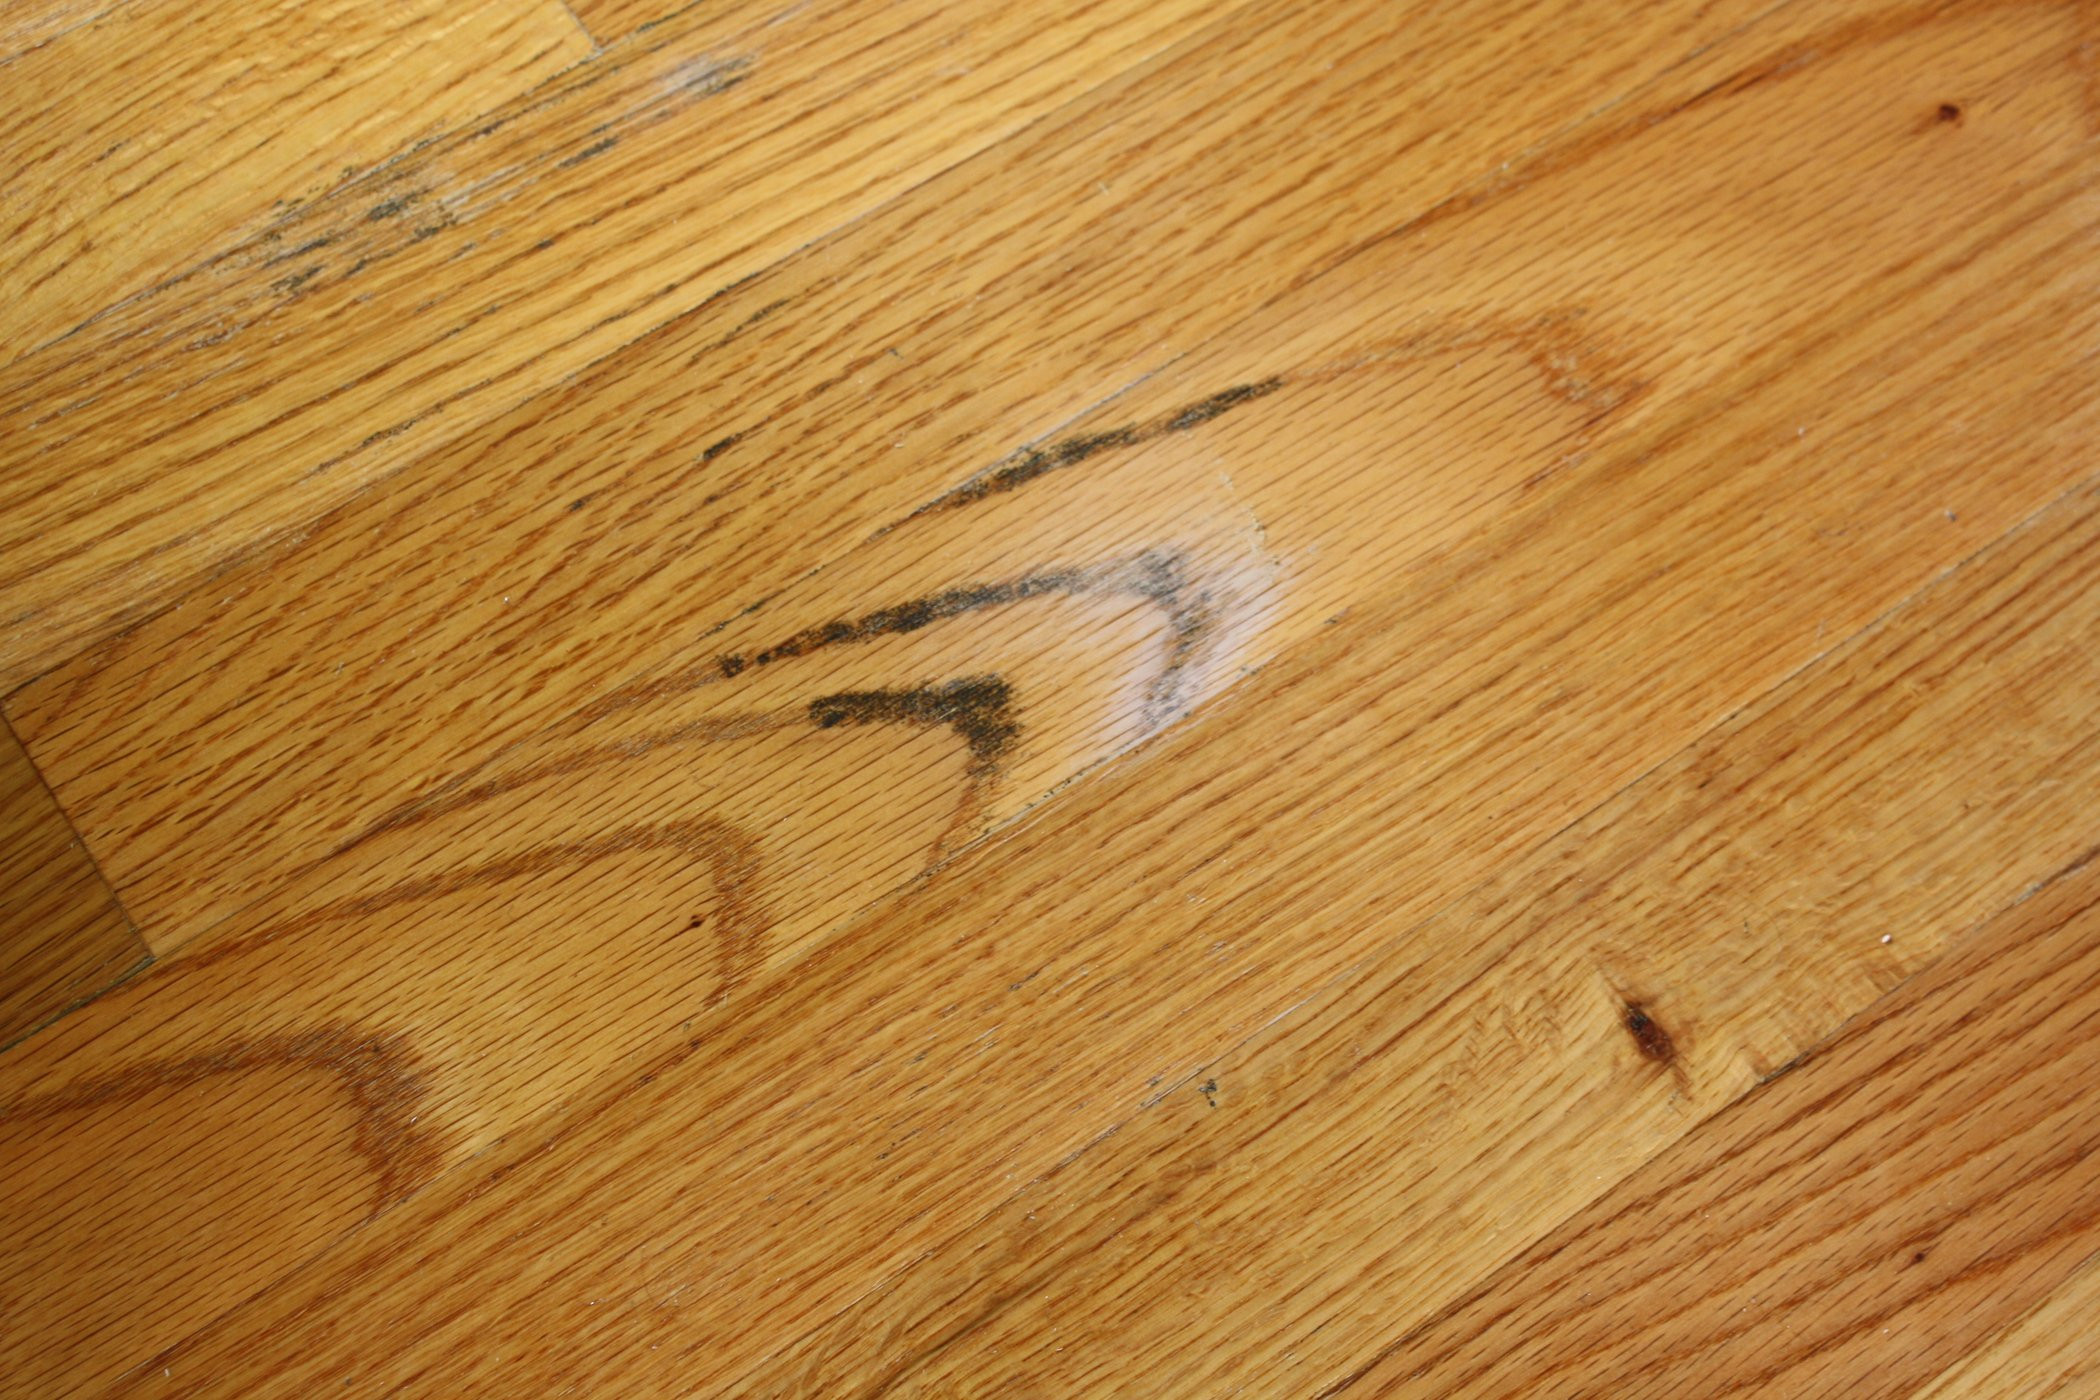 hardwood floor refinishing supplies near me of how to clean mold from a wood floor 4 steps throughout fylcmqyg7dyp6ds